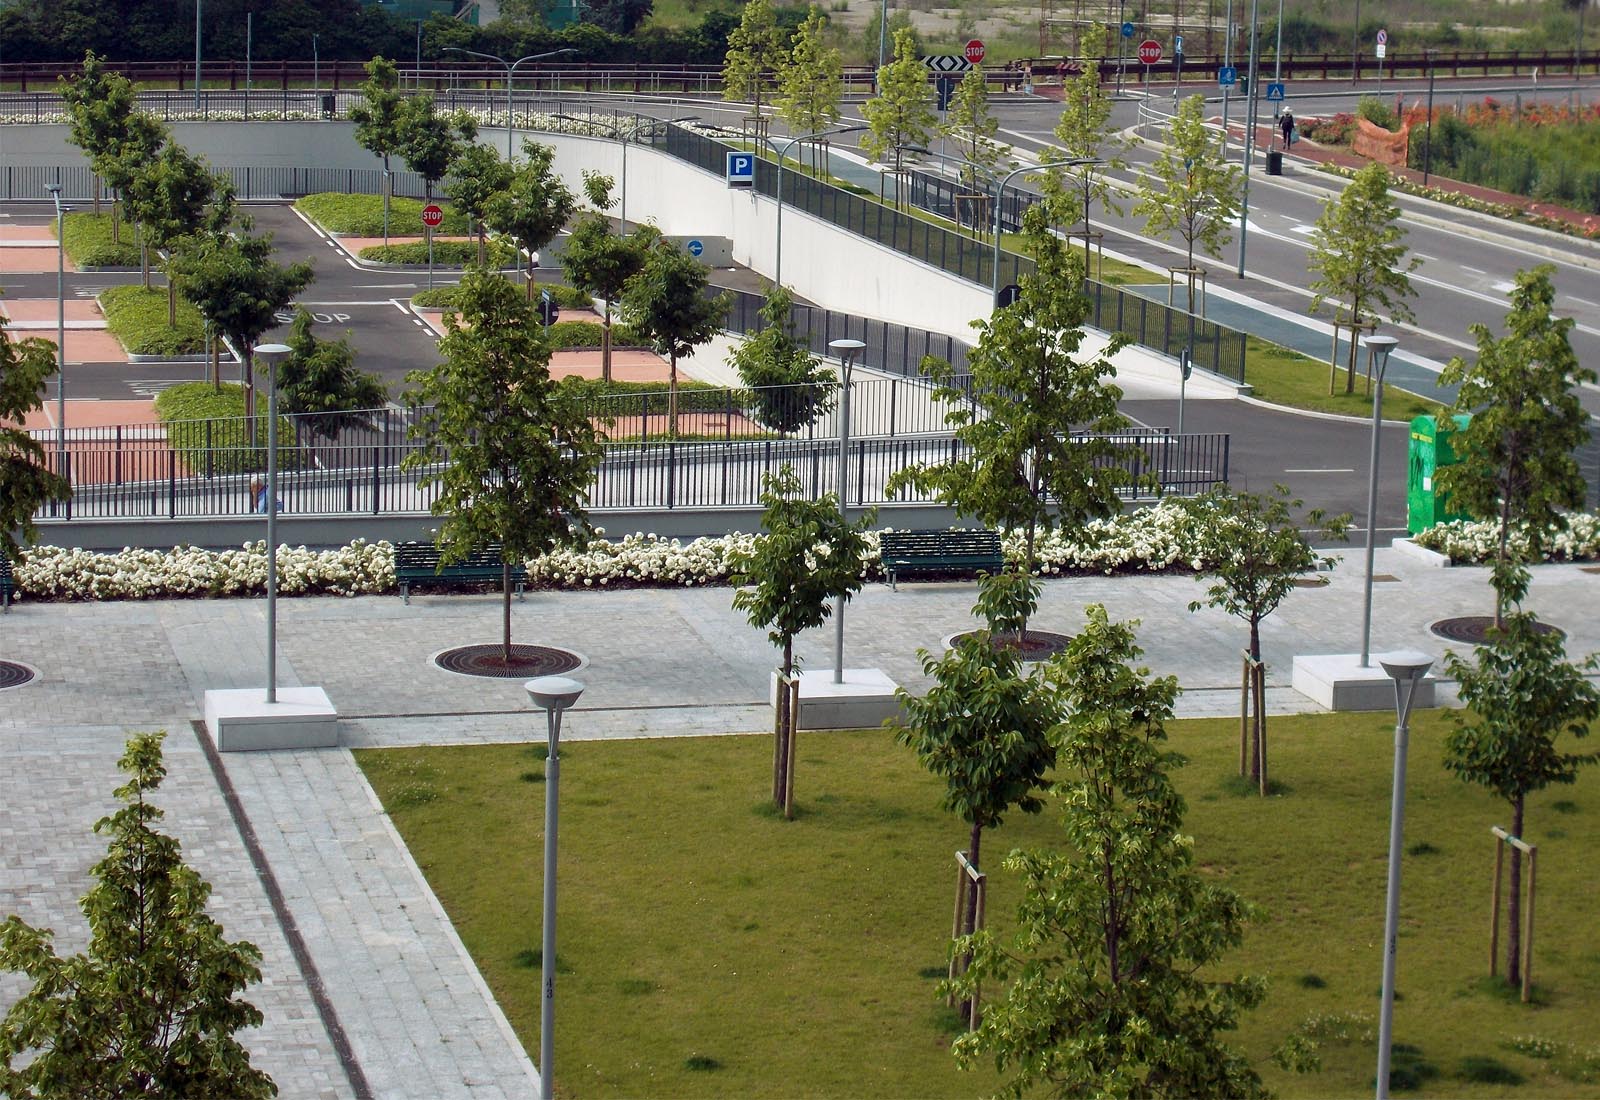 Square and parking lots in Adriano area Milan - The square and the south parking lot